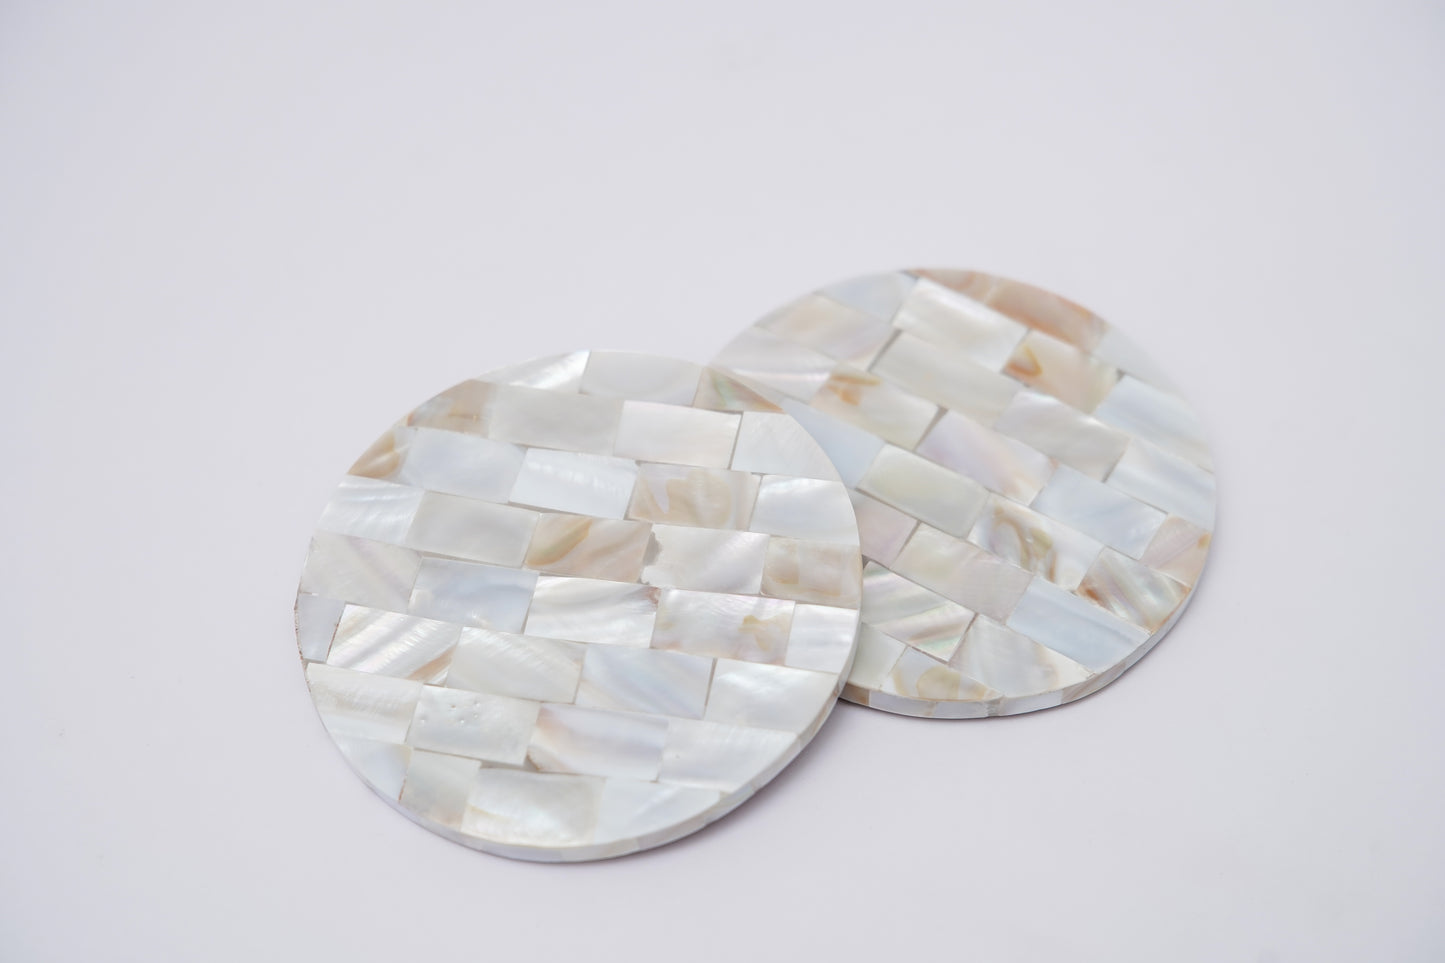 Mother of Pearl Coaster Set of 2 for Tea Coffee Cocktail Handmade MOP Coaster for Hot & Cold Drinks Coaster for Dining Table Home and Office Round- Off White